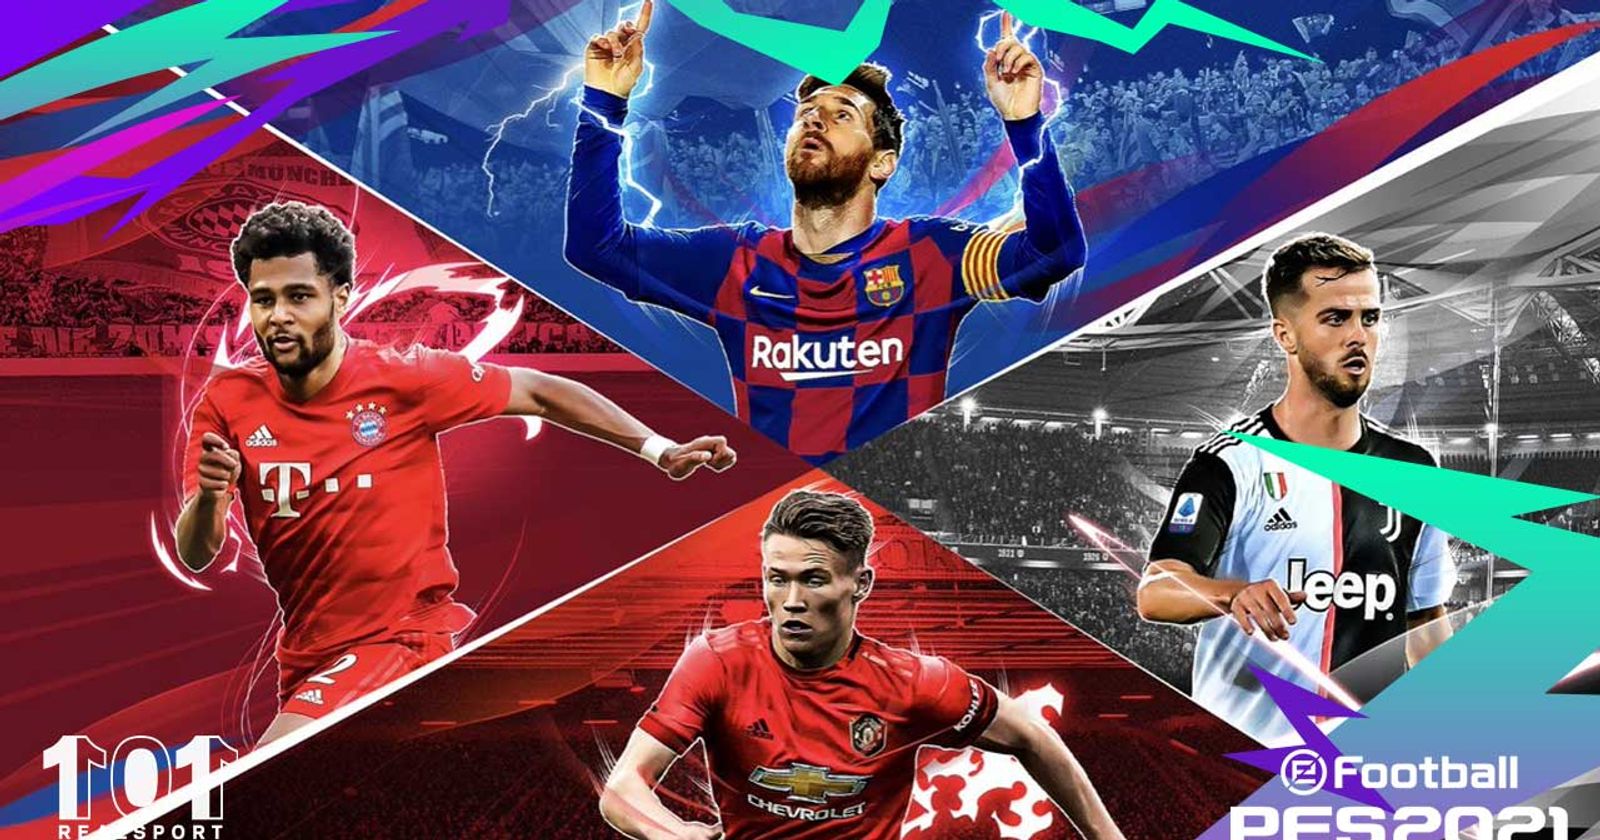 Global launch of eFootball PES 2021 MOBILE, Partner Activation, News